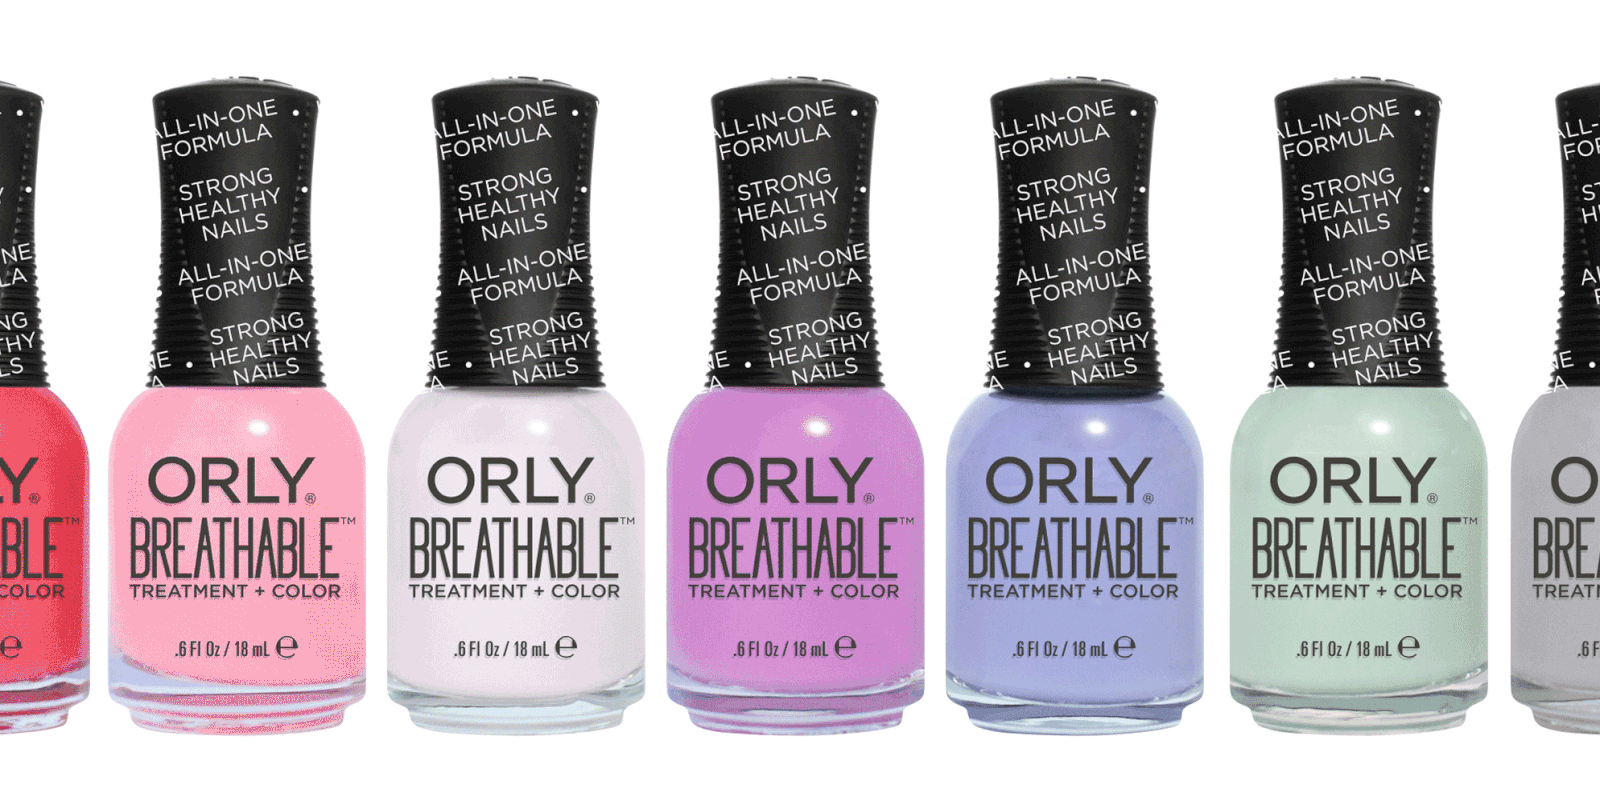 ORLY Launches Breathable Treatment Nail Polish Colors in 2018